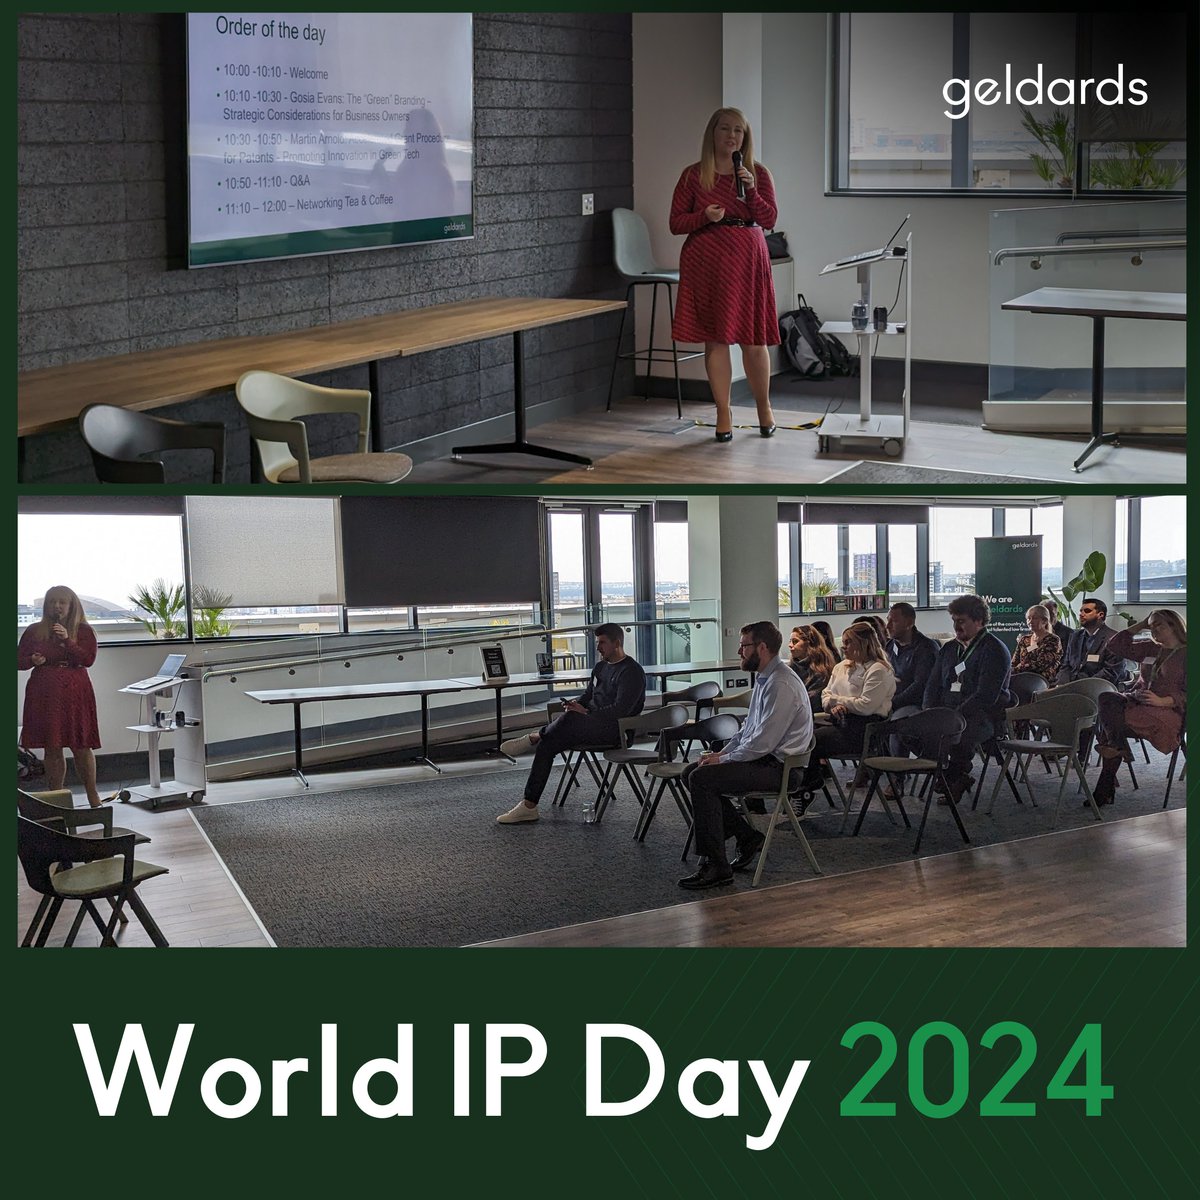 A great launch for our first World IP Day Event, taking place today in the Geldards Cardiff Office! We're already looking forward to the next. #WorldIPDay #IPLaw